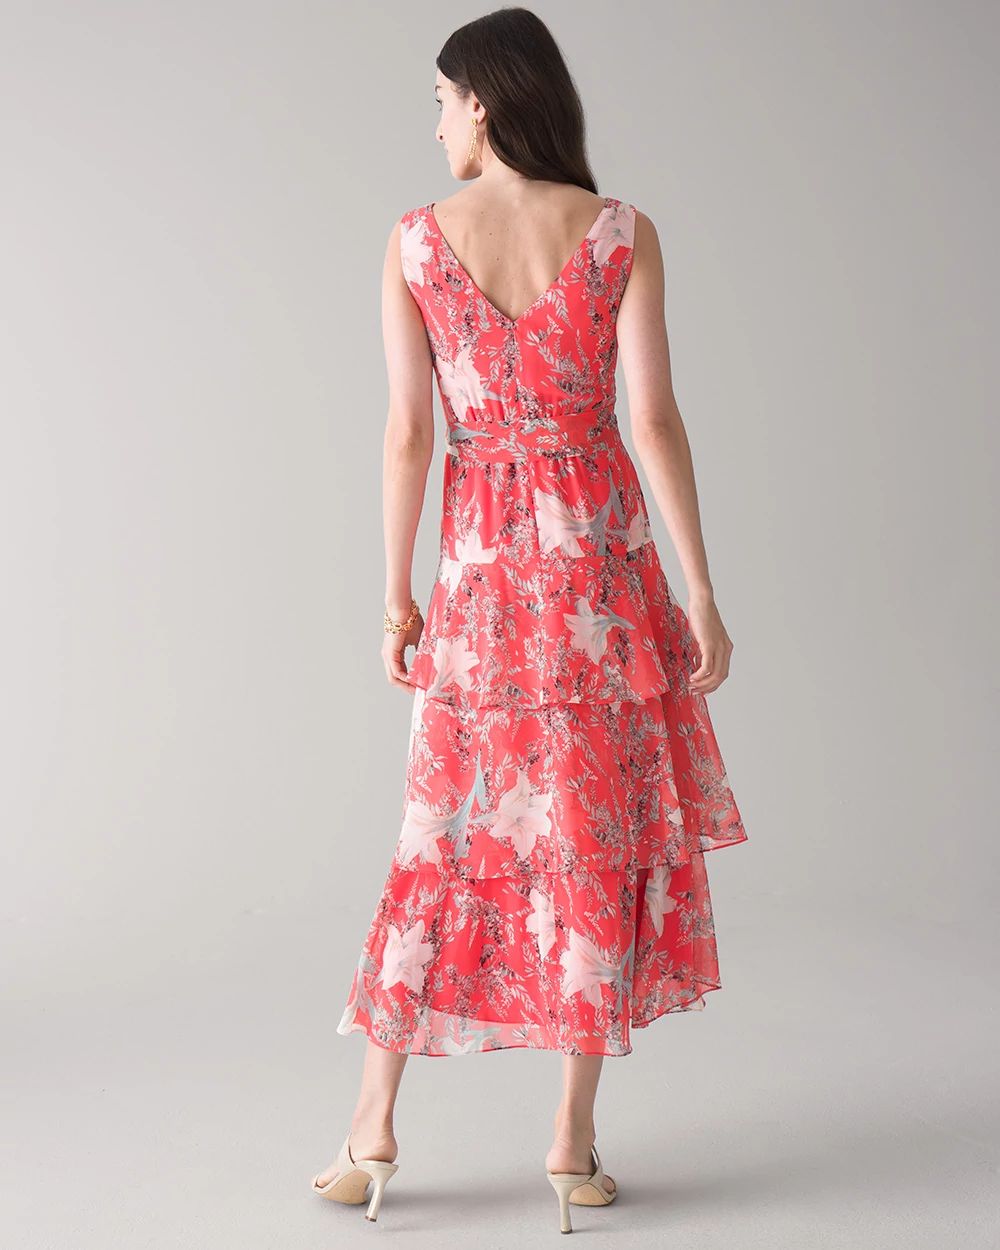 Flirty Floral Print Midi Dress click to view larger image.